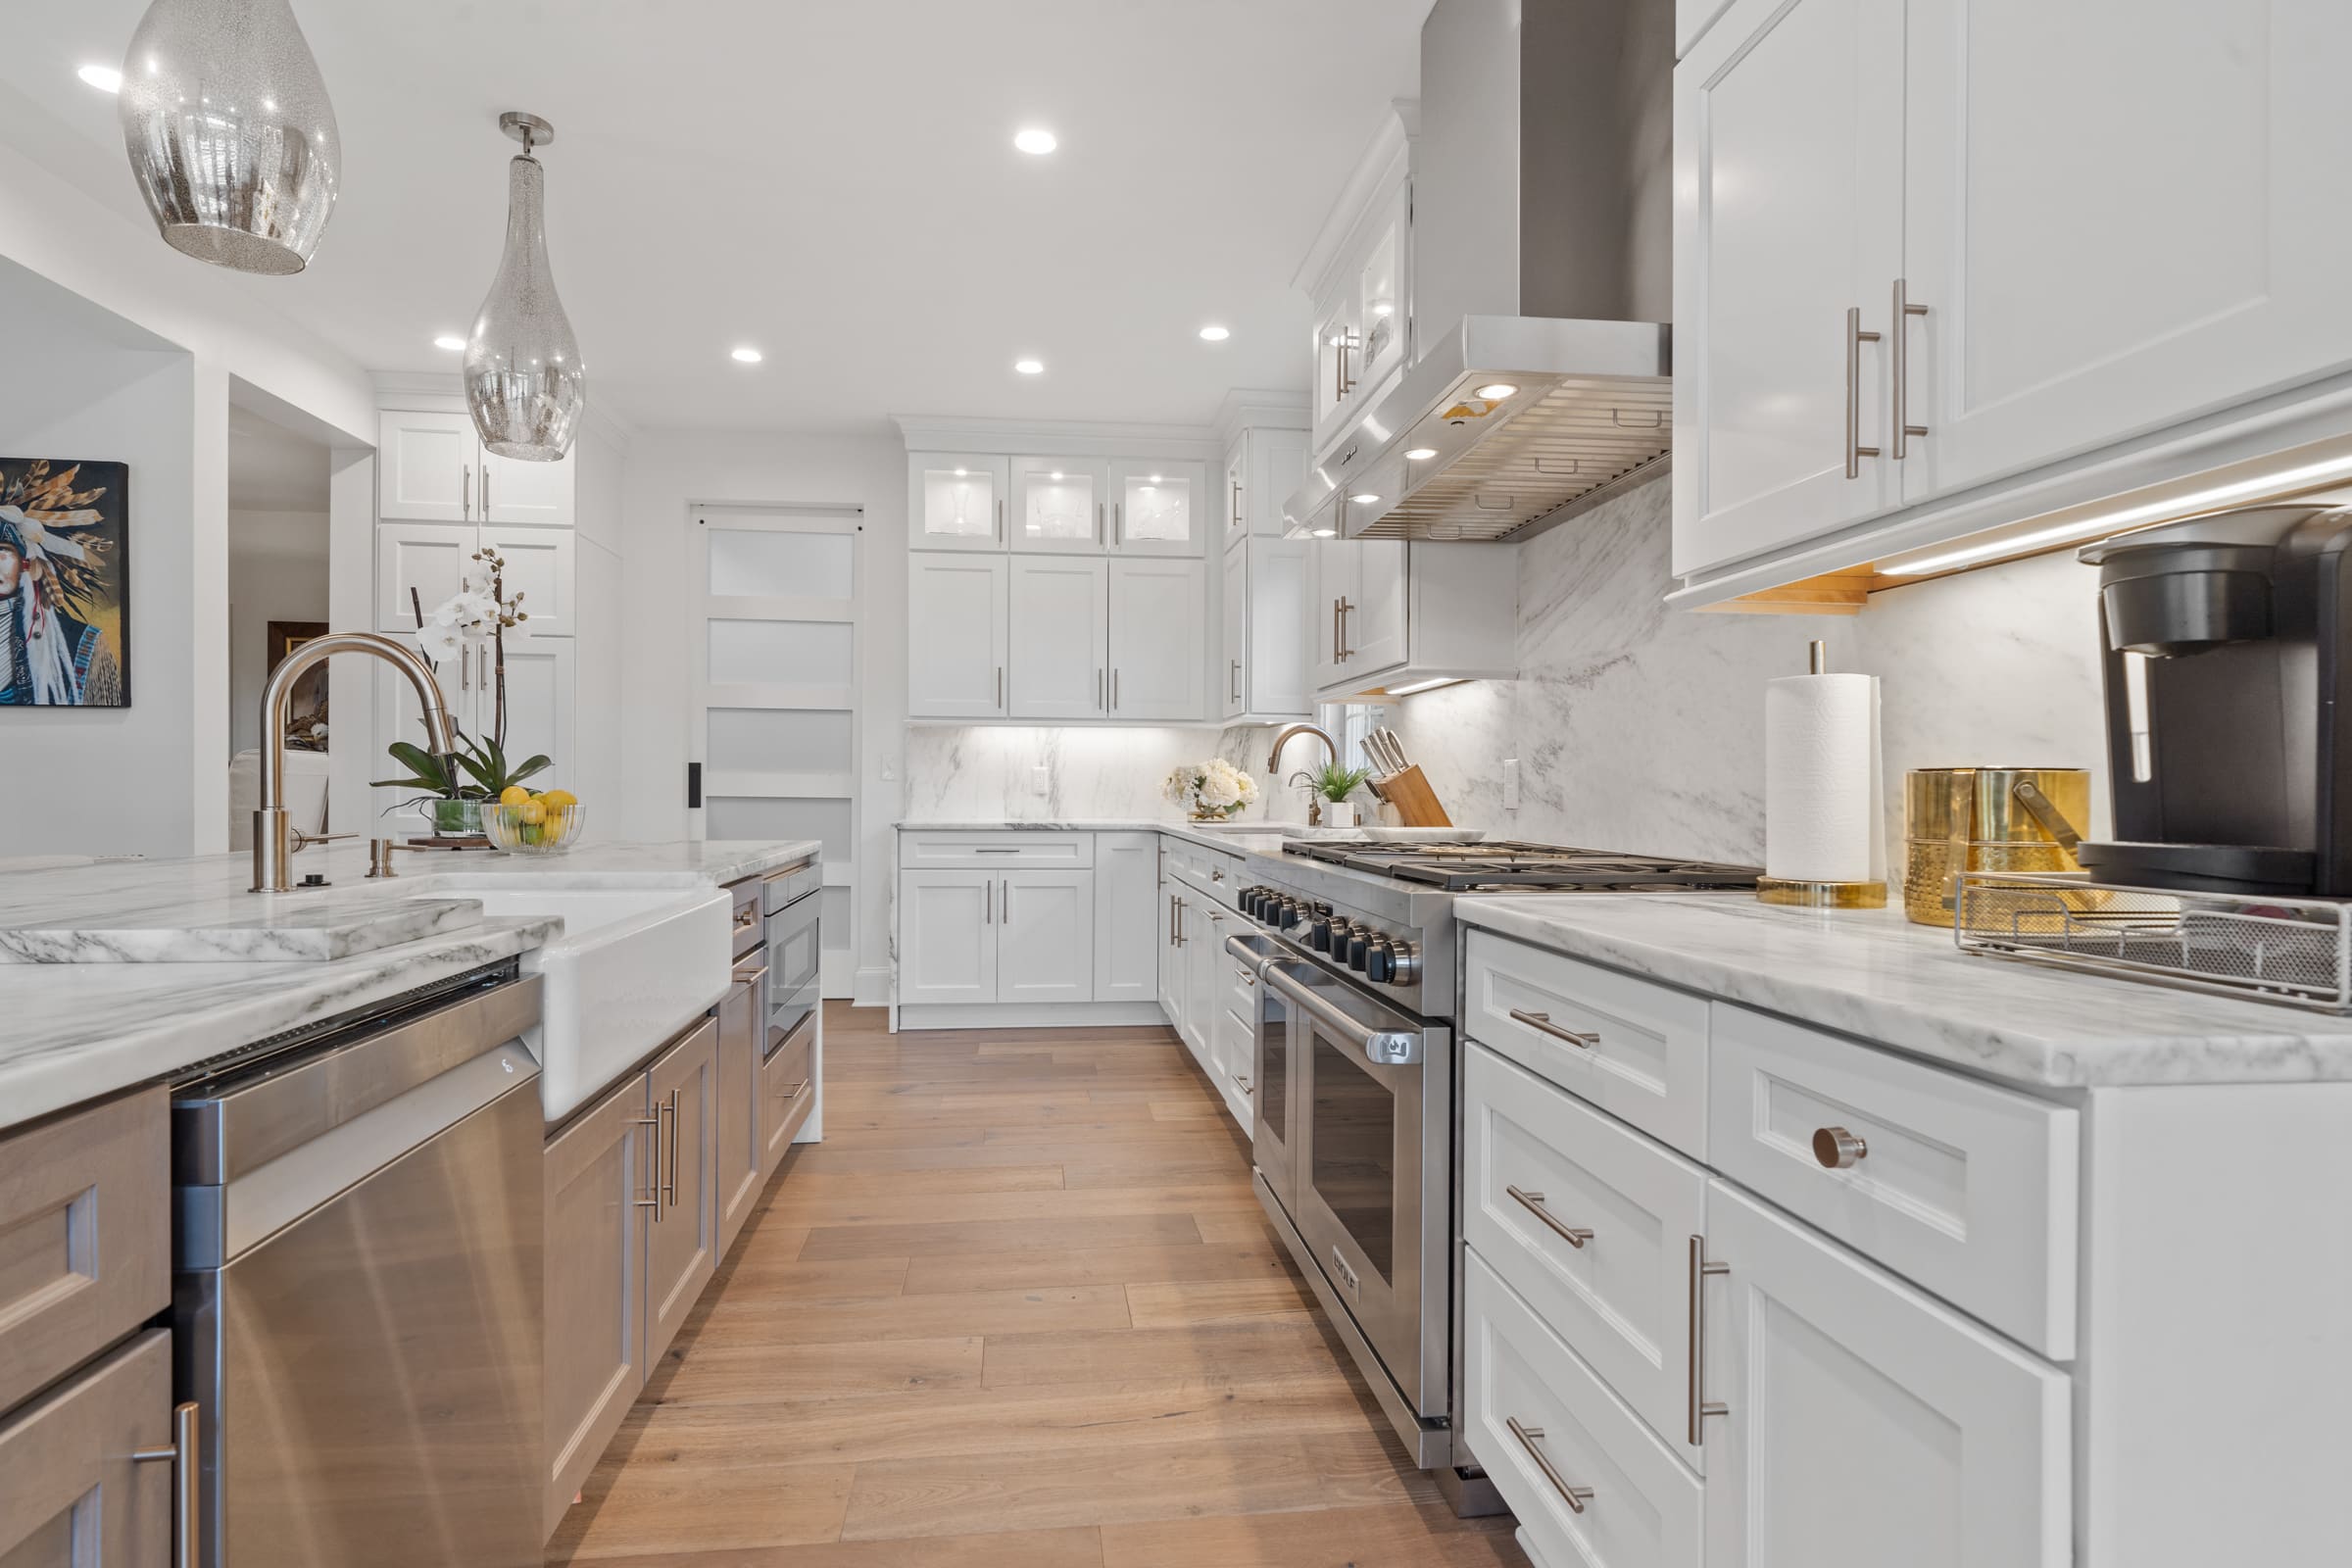 Full Kitchen Remodel | PAXISgroup